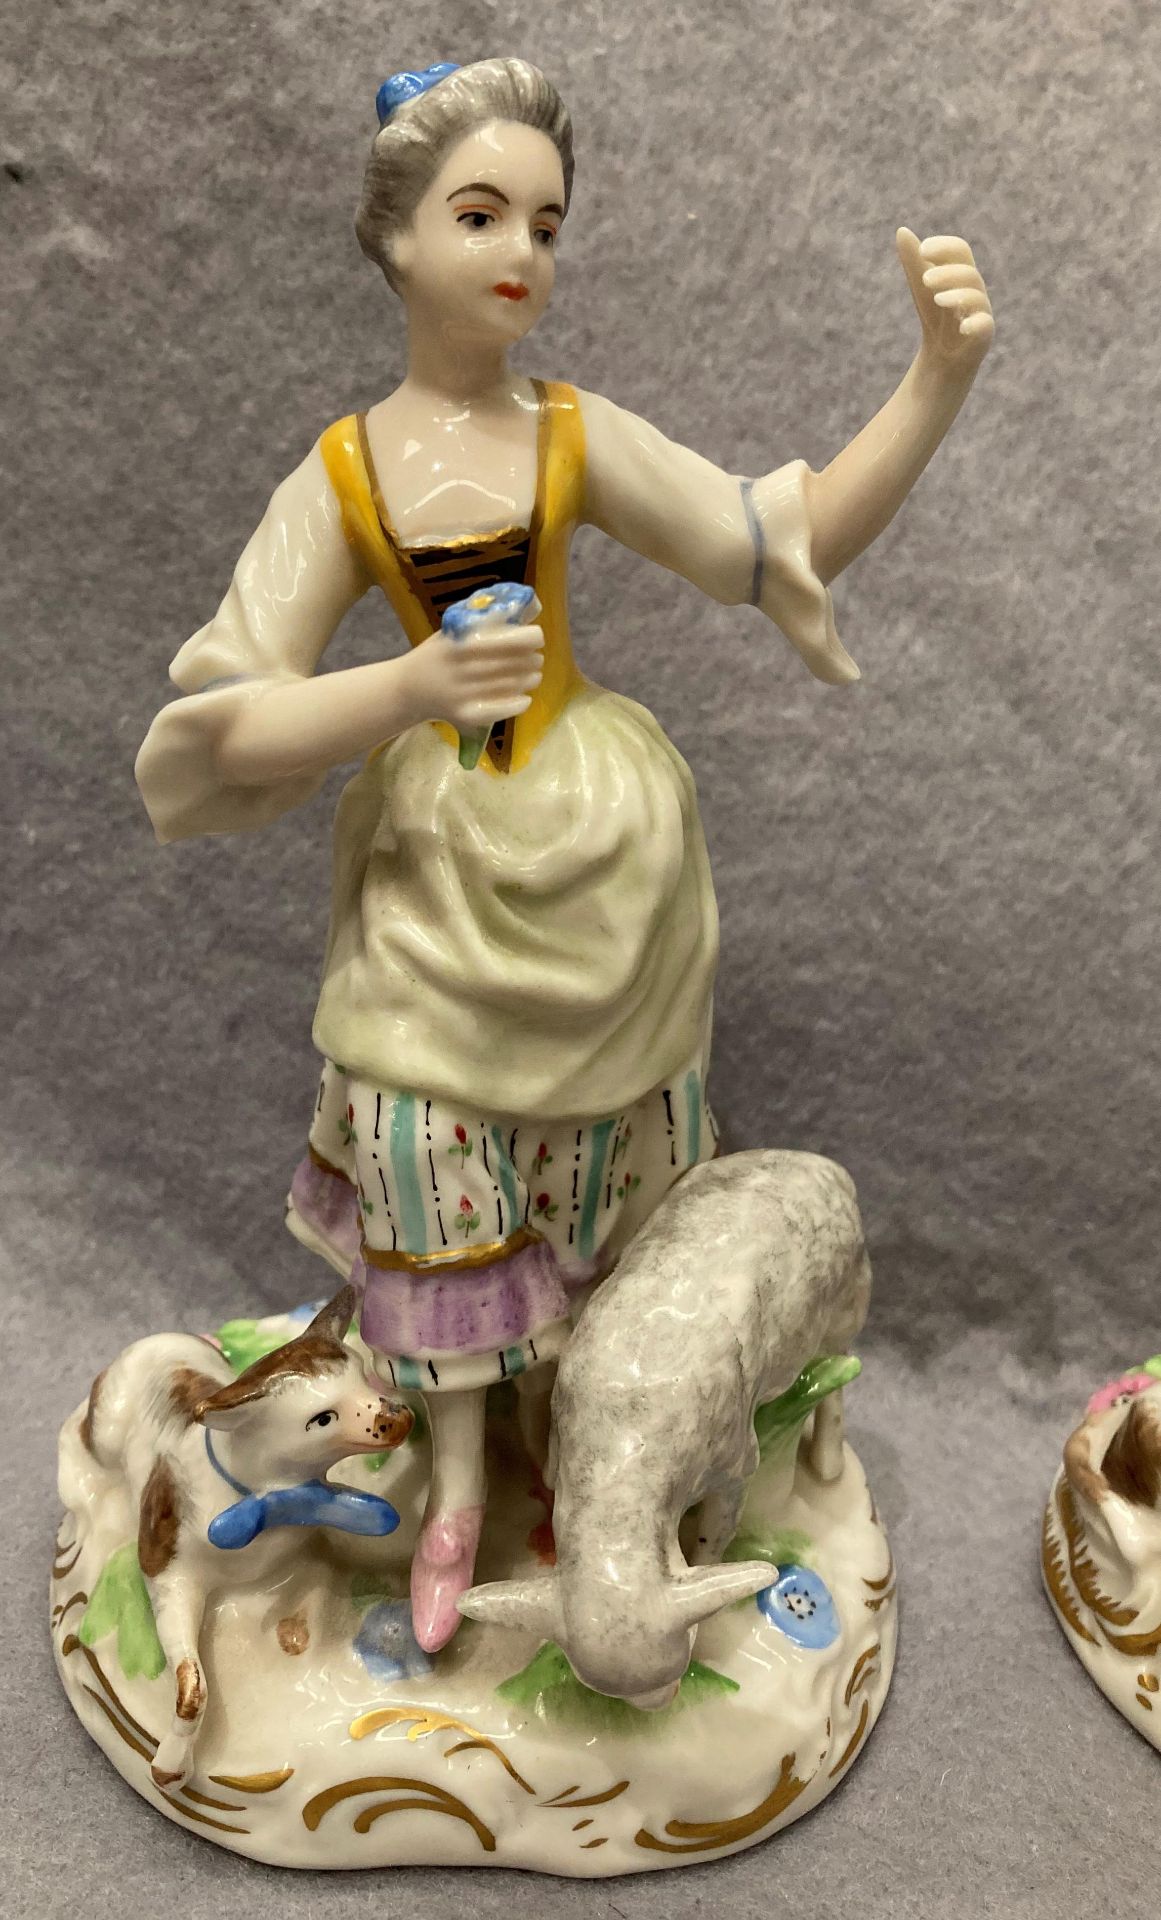 Pair of porcelain figurines, man and woman with animals, damage to the man's animal with bow, - Image 2 of 6